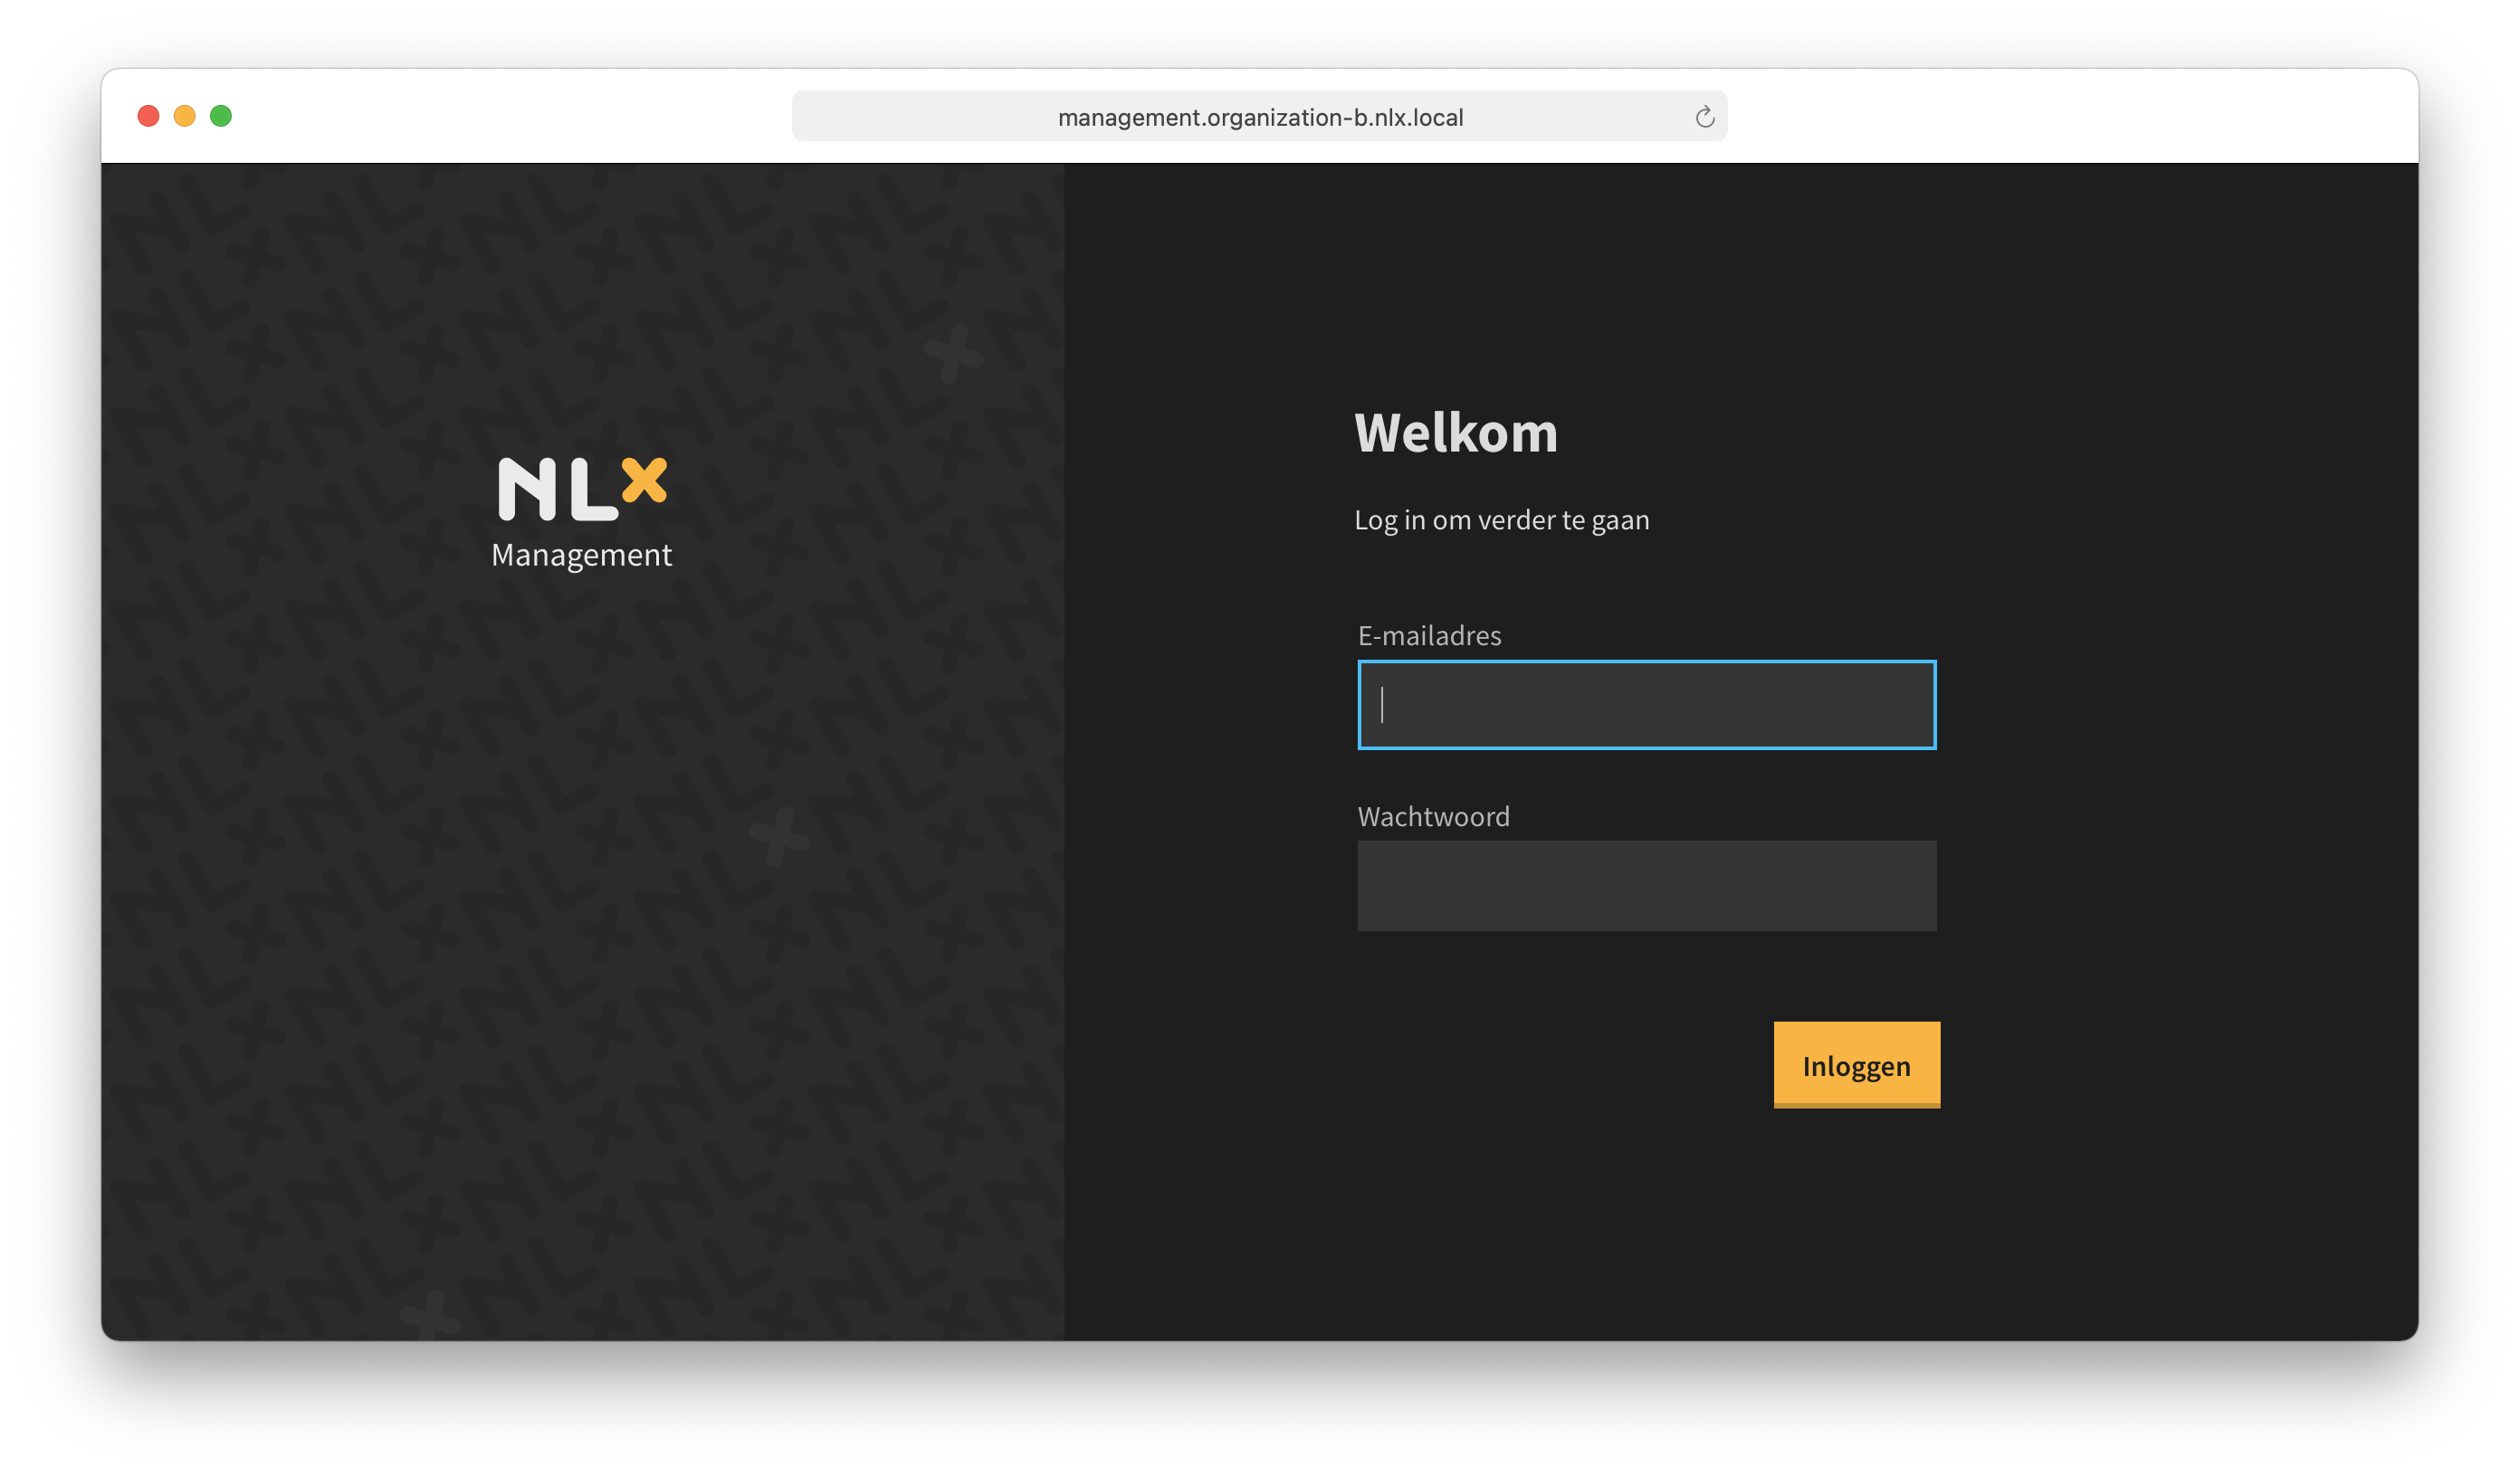 Screenshot of the NLX Management web interface using Basic Authentication